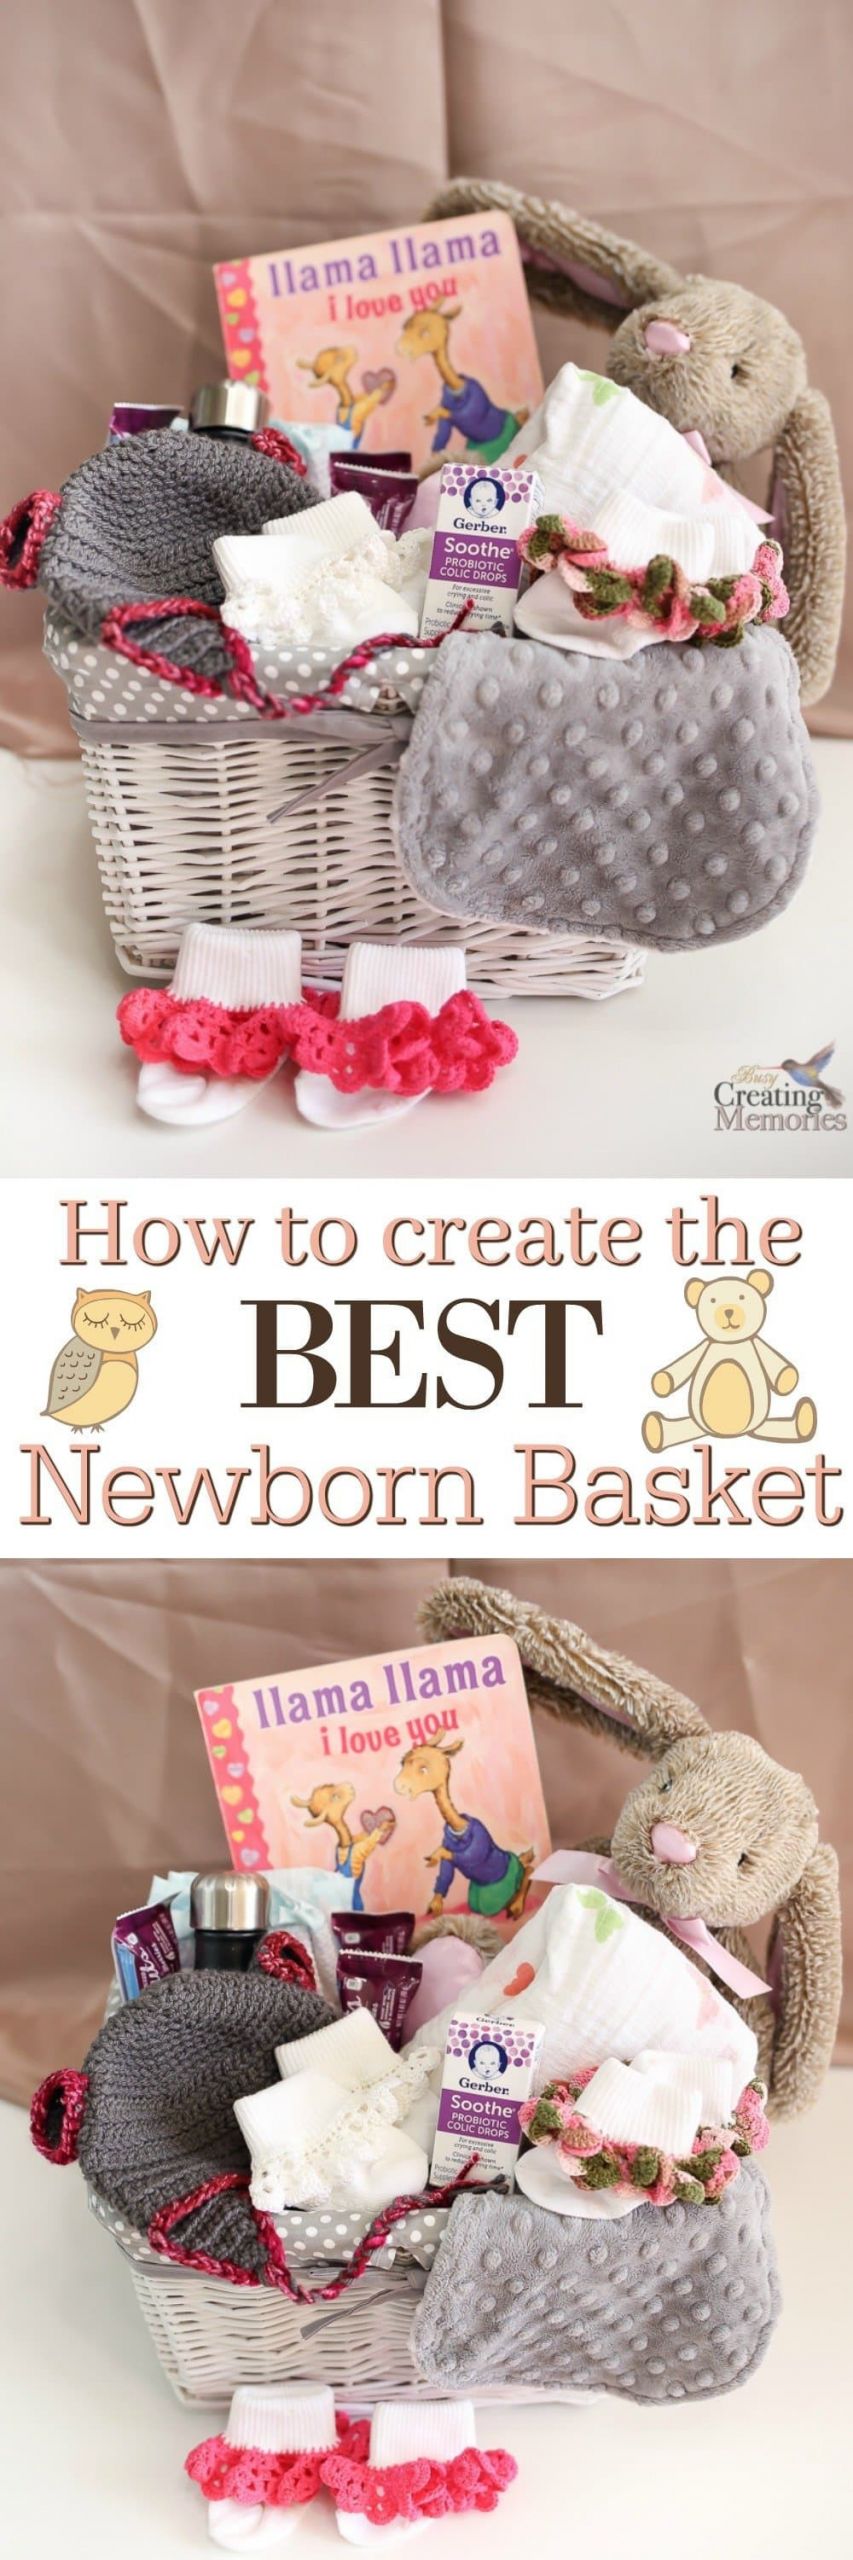 Pinterest Baby Gifts
 How to create the BEST Newborn Gift Basket that Mom will love